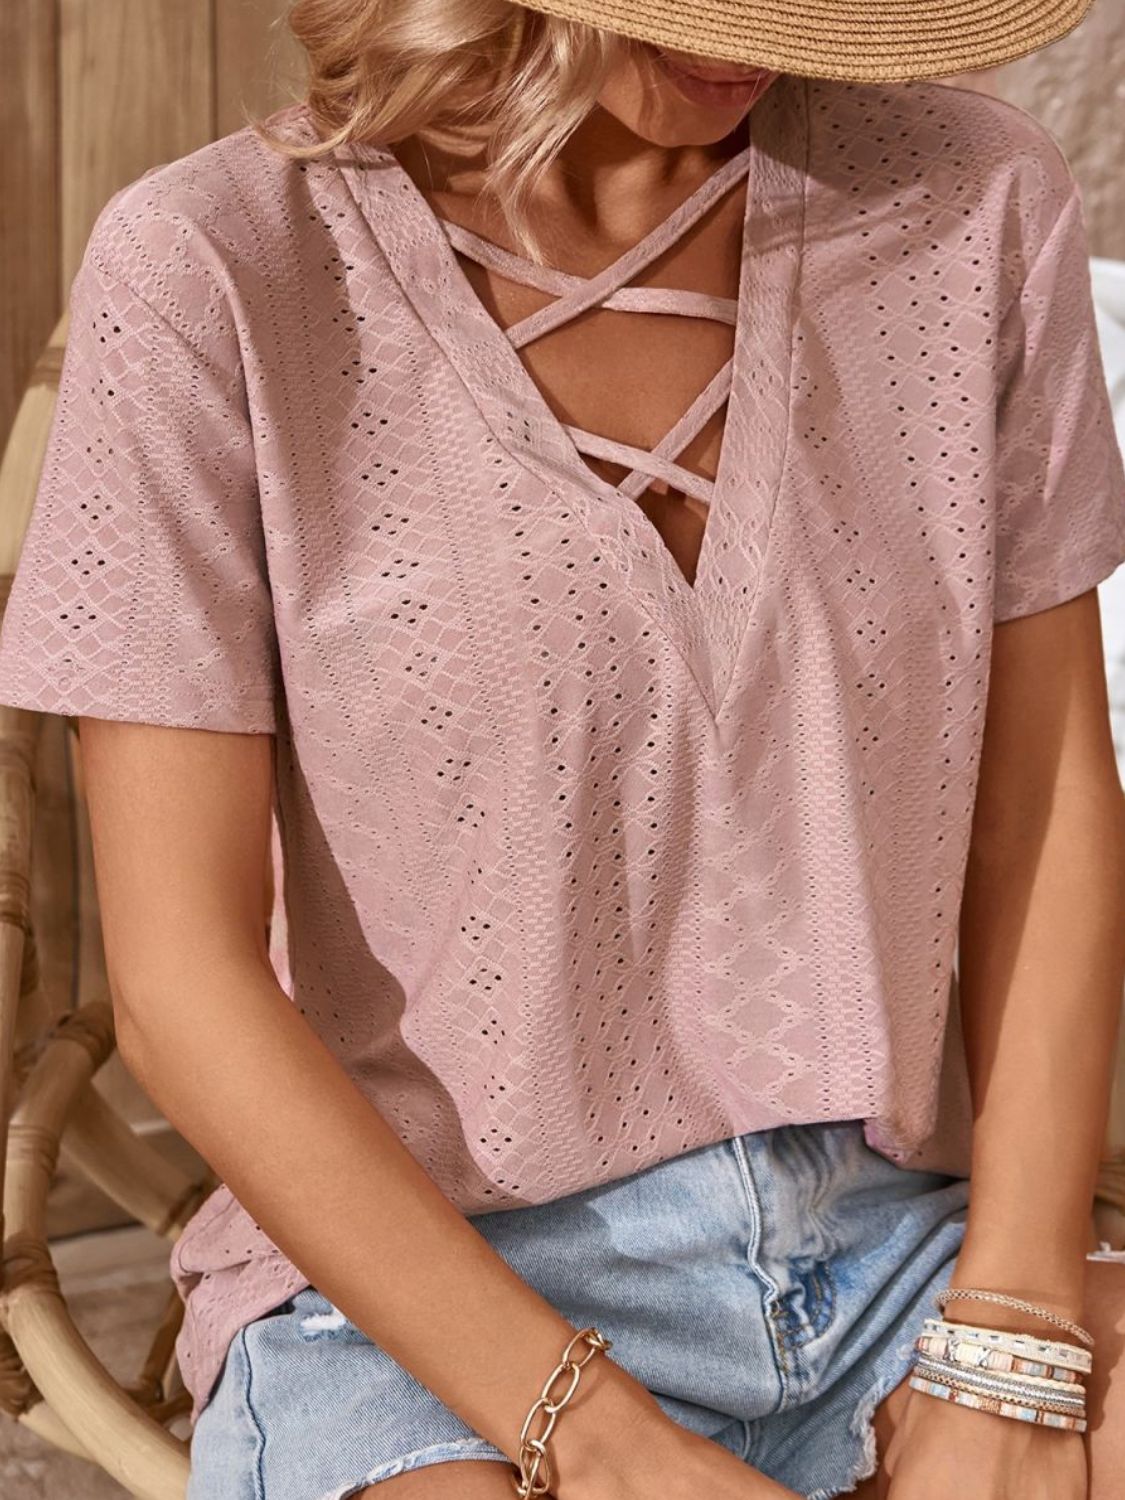 Crisscross V-Neck Eyelet Top - Kawaii Stop - Bigh, Casual Chic, Contemporary Wardrobe Must-Have., Cozy and Stylish, Elegant Silhouette, Everyday Comfort, Eyelet Detail, Machine Washable, Modern Woman's Essential, Ship From Overseas, Shipping Delay 09/29/2023 - 10/03/2023, Solid Pattern, Stylish Versatility, T-Shirt, T-Shirts, Tee, Trendy Eyelet Top, V-Neck Top, Women's Clothing, Women's Top